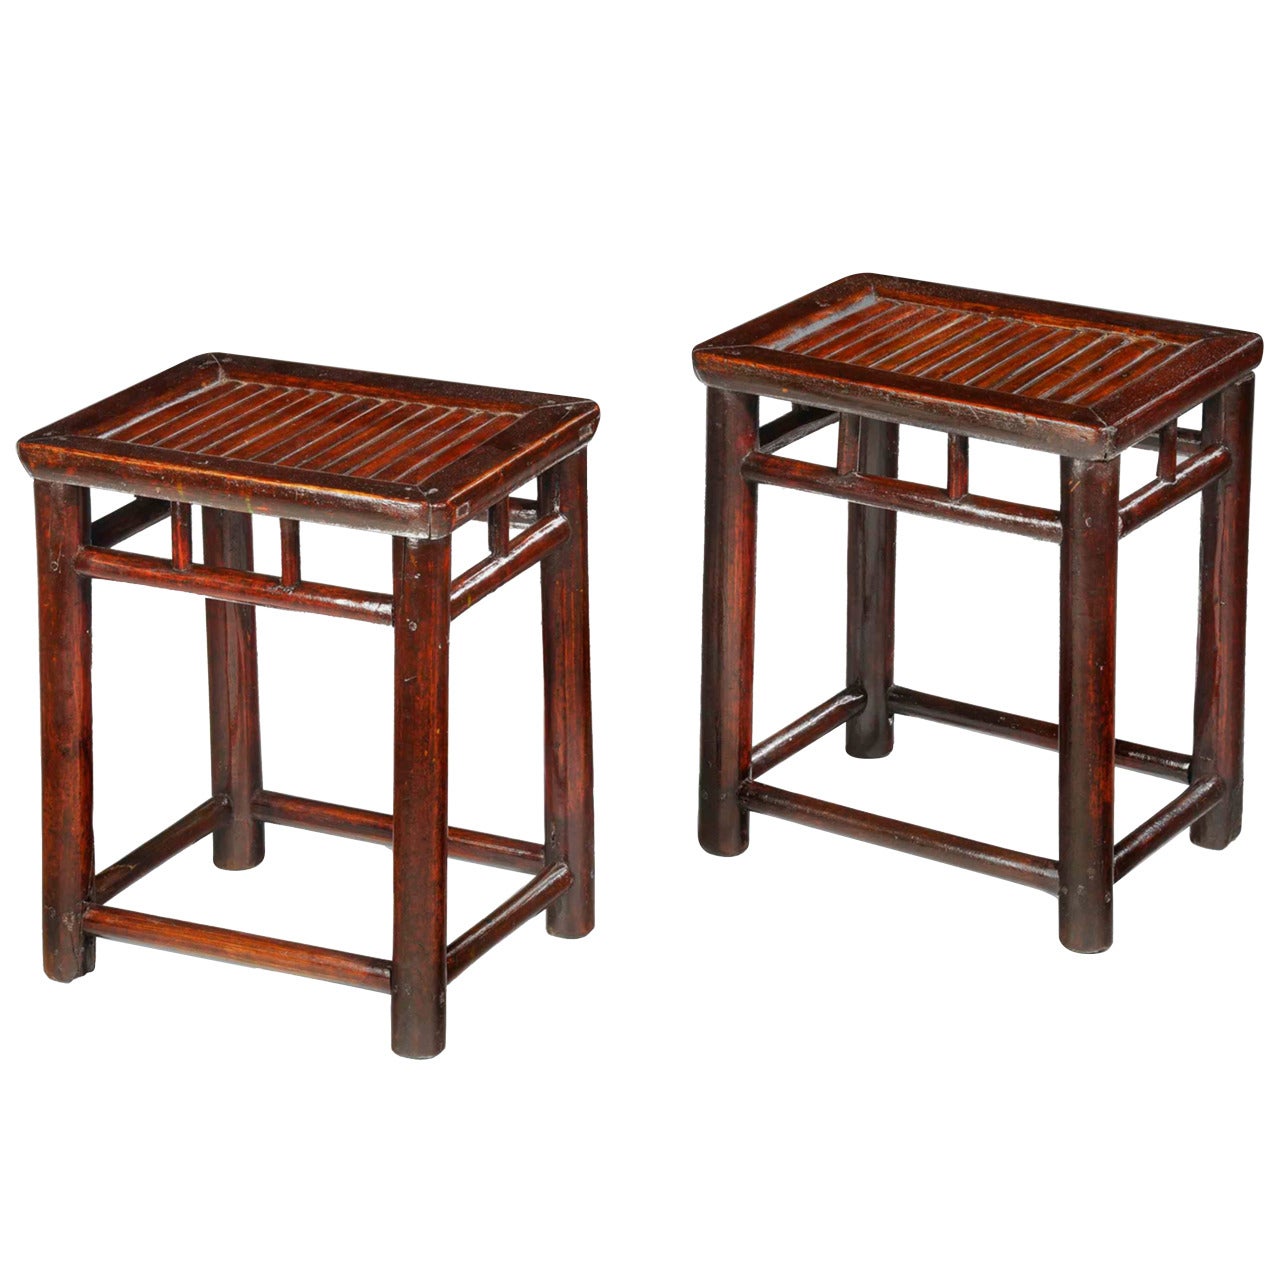 Pair of Chinese Stools with Bamboo Tops